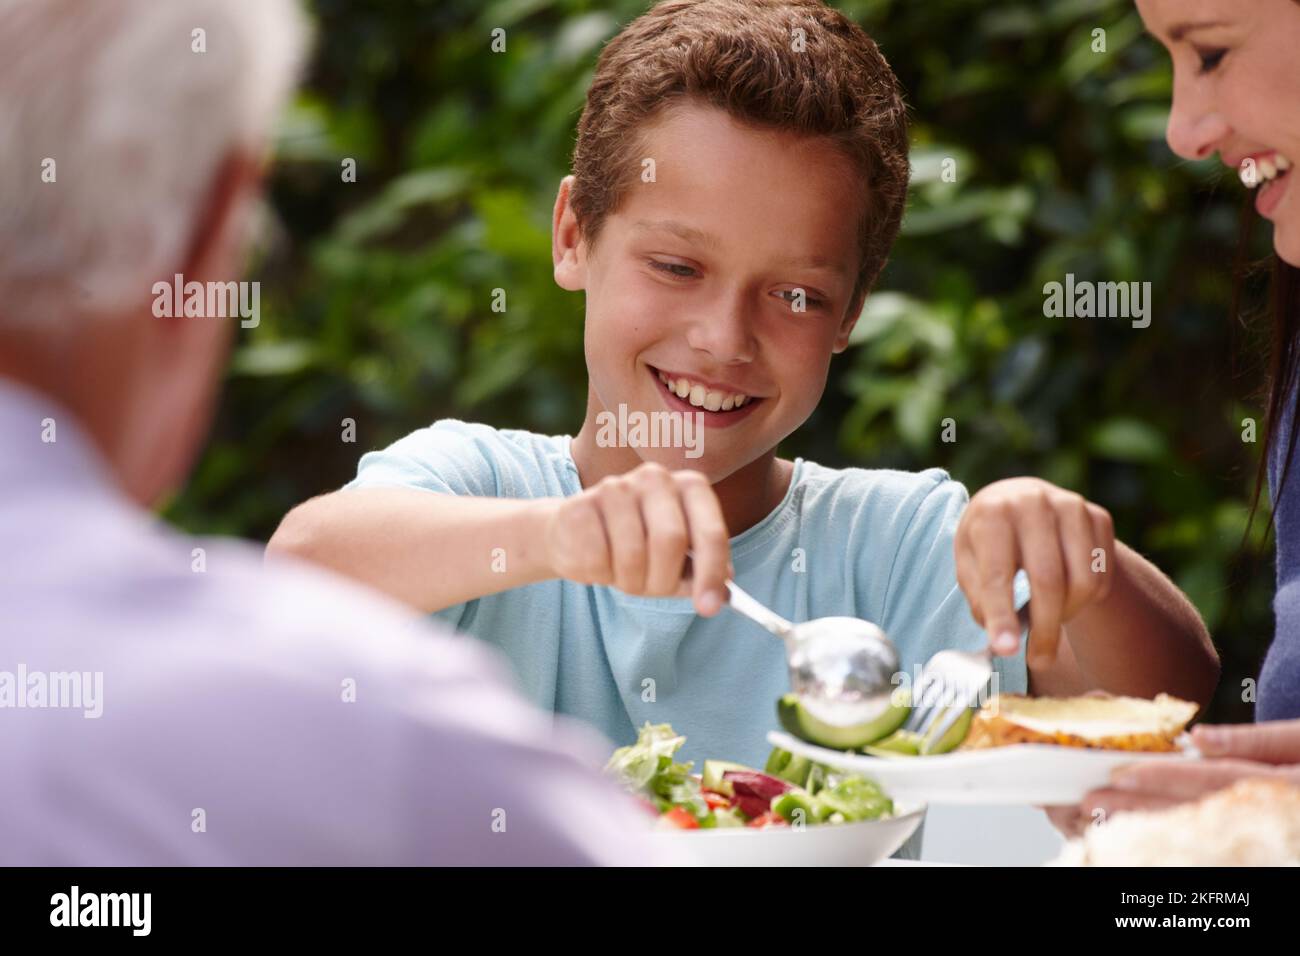 Tucking into some salad. a little boy having lunch with his family outside. Stock Photo